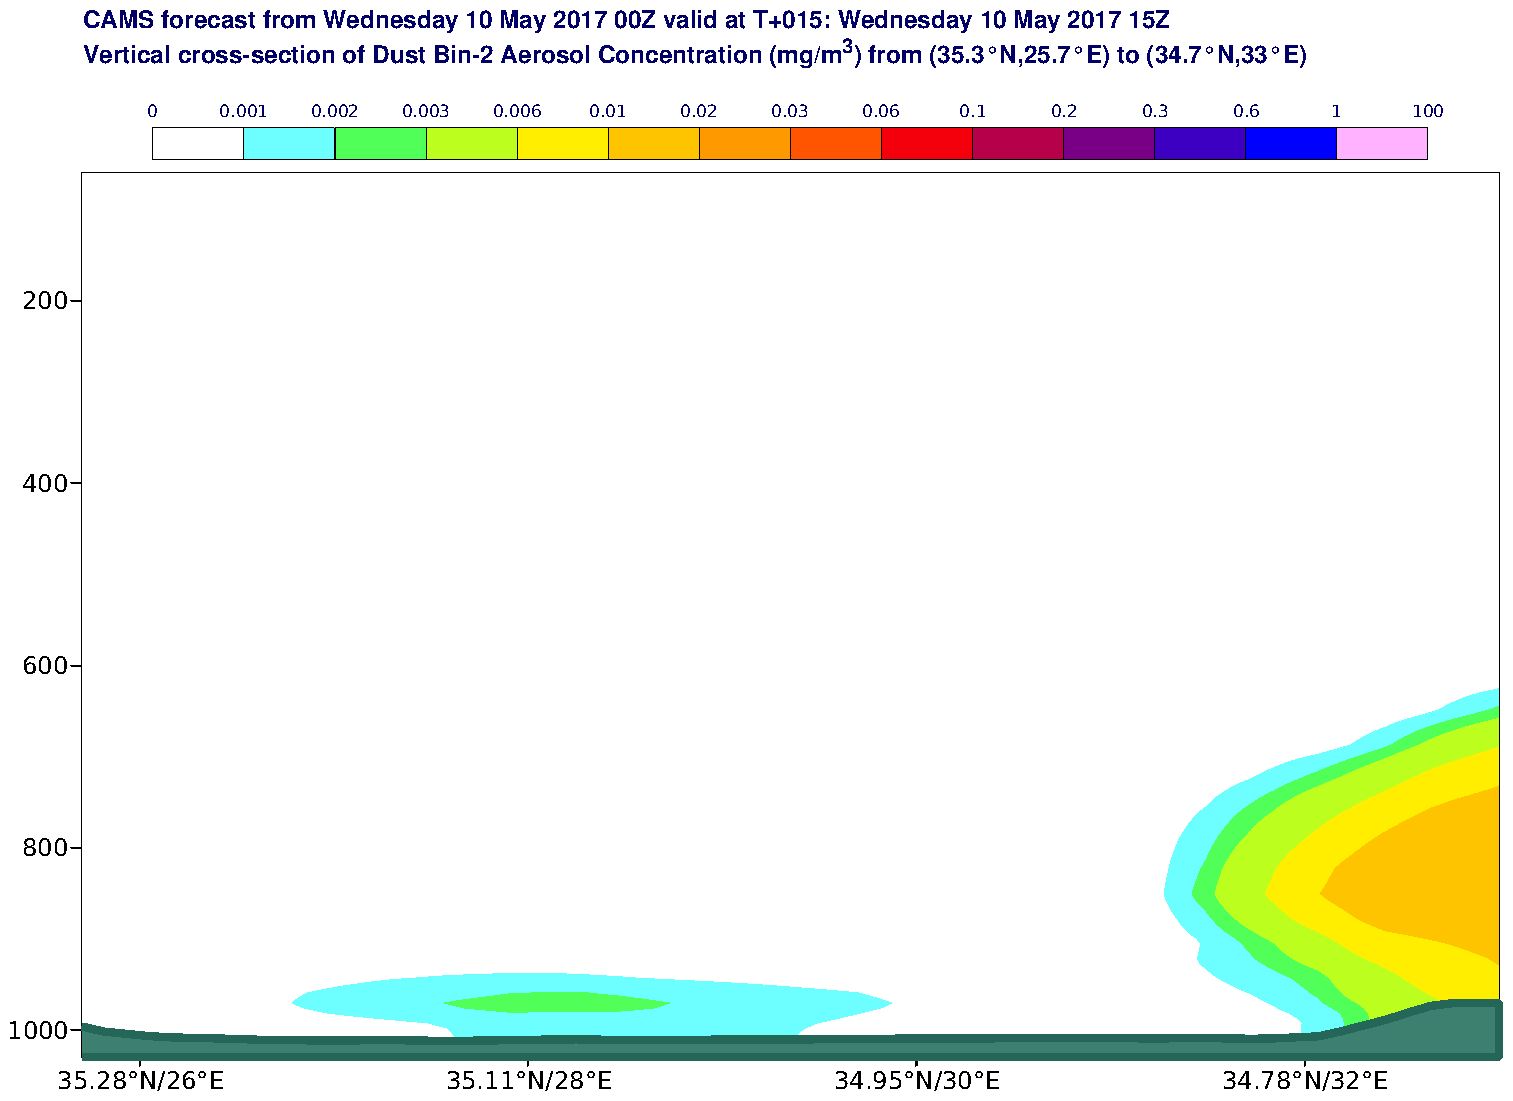 Vertical cross-section of Dust Bin-2 Aerosol Concentration (mg/m3) valid at T15 - 2017-05-10 15:00